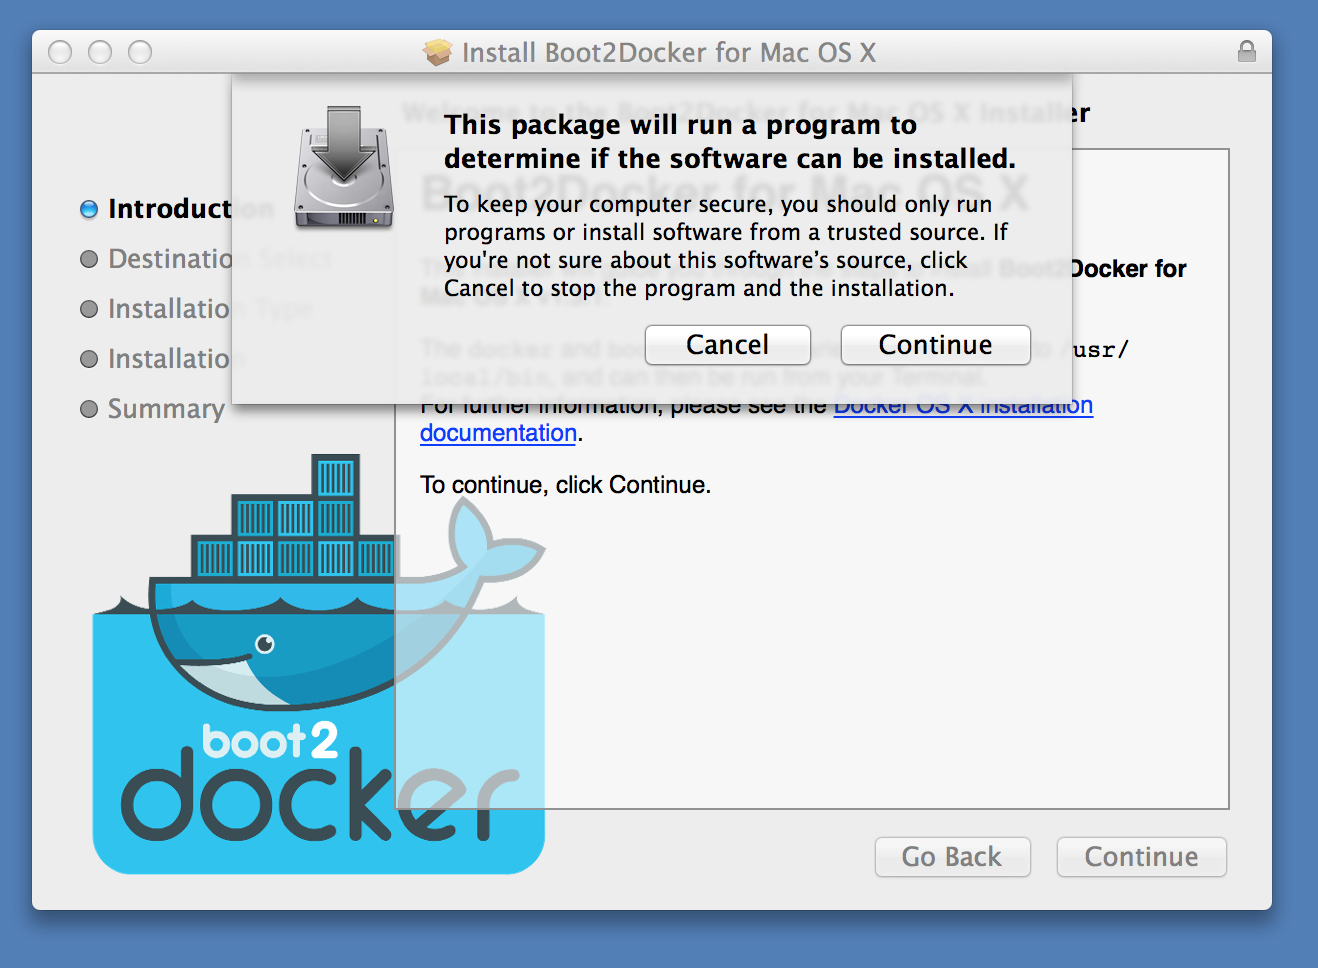 Allow installer to run a program to detect if boot2docker can be installed